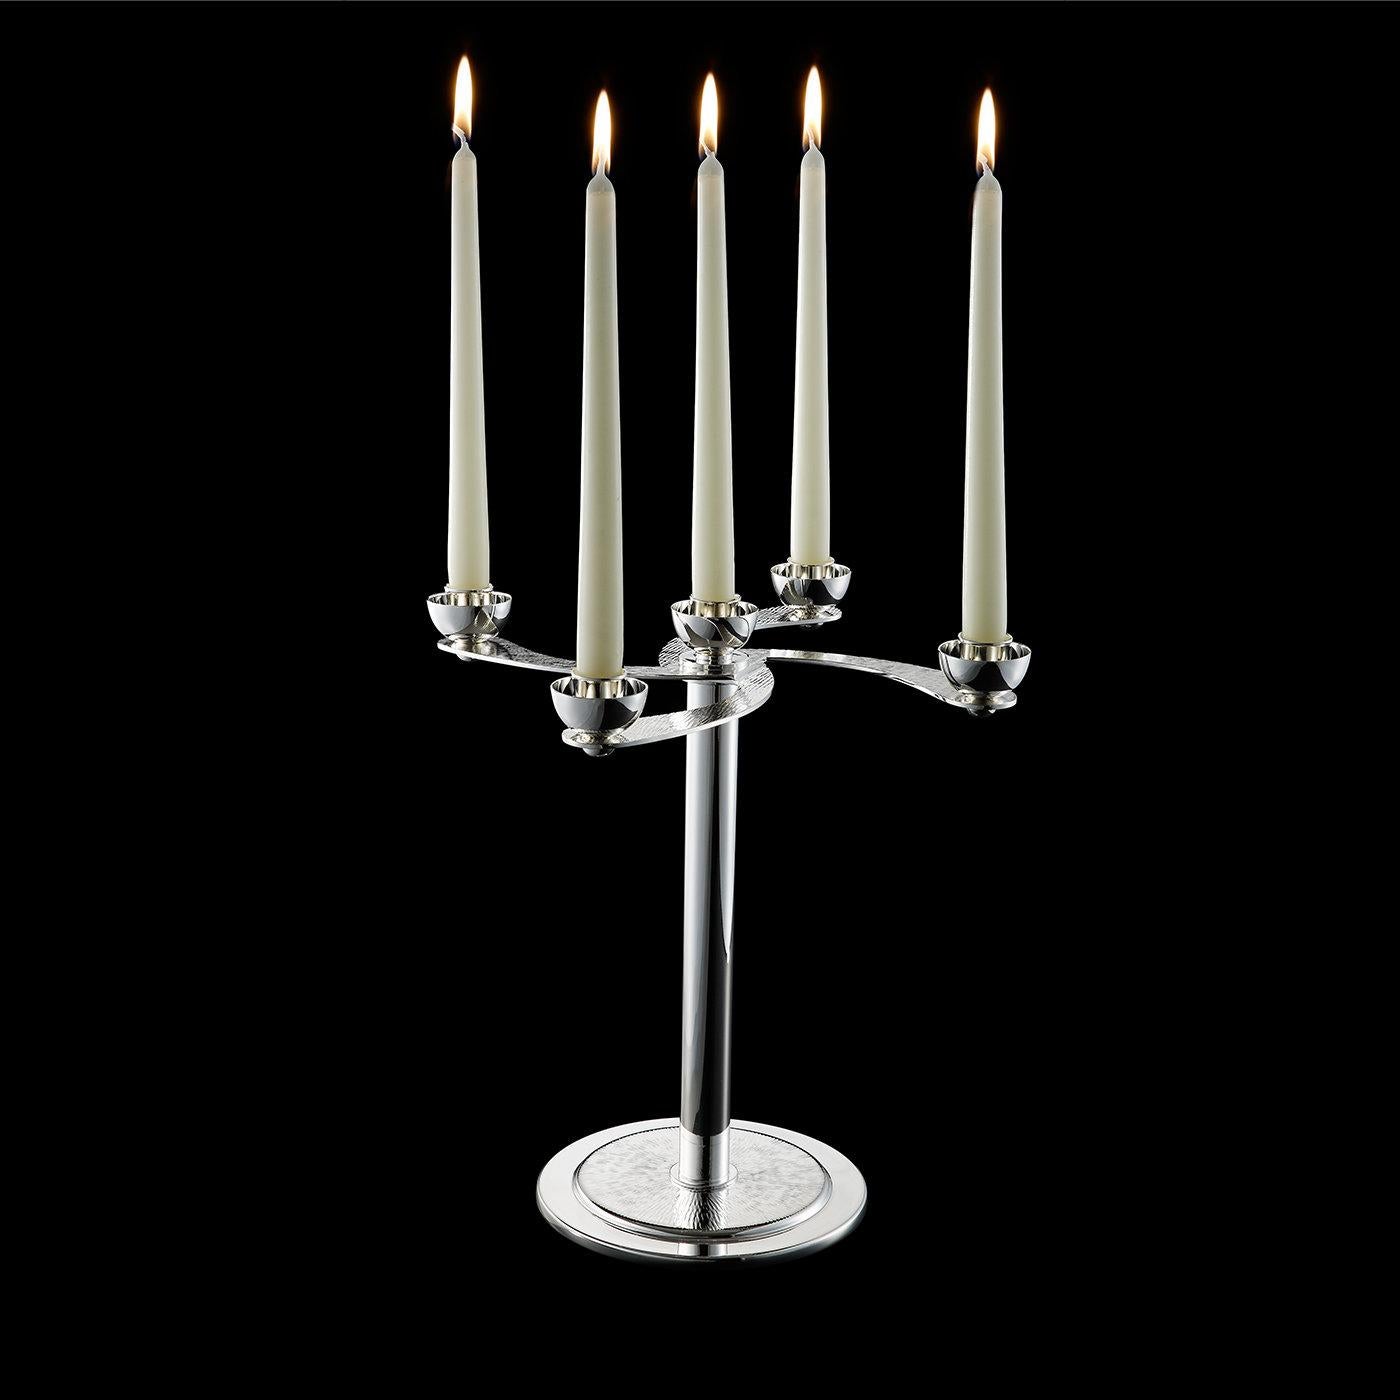 Beautiful candelabra holds five candles and is elegantly constructed in a silver-plated alloy. The candelabra can be separated into two pieces, with the top holding candles and the base becoming a vase. The arms of the candelabra are also movable.